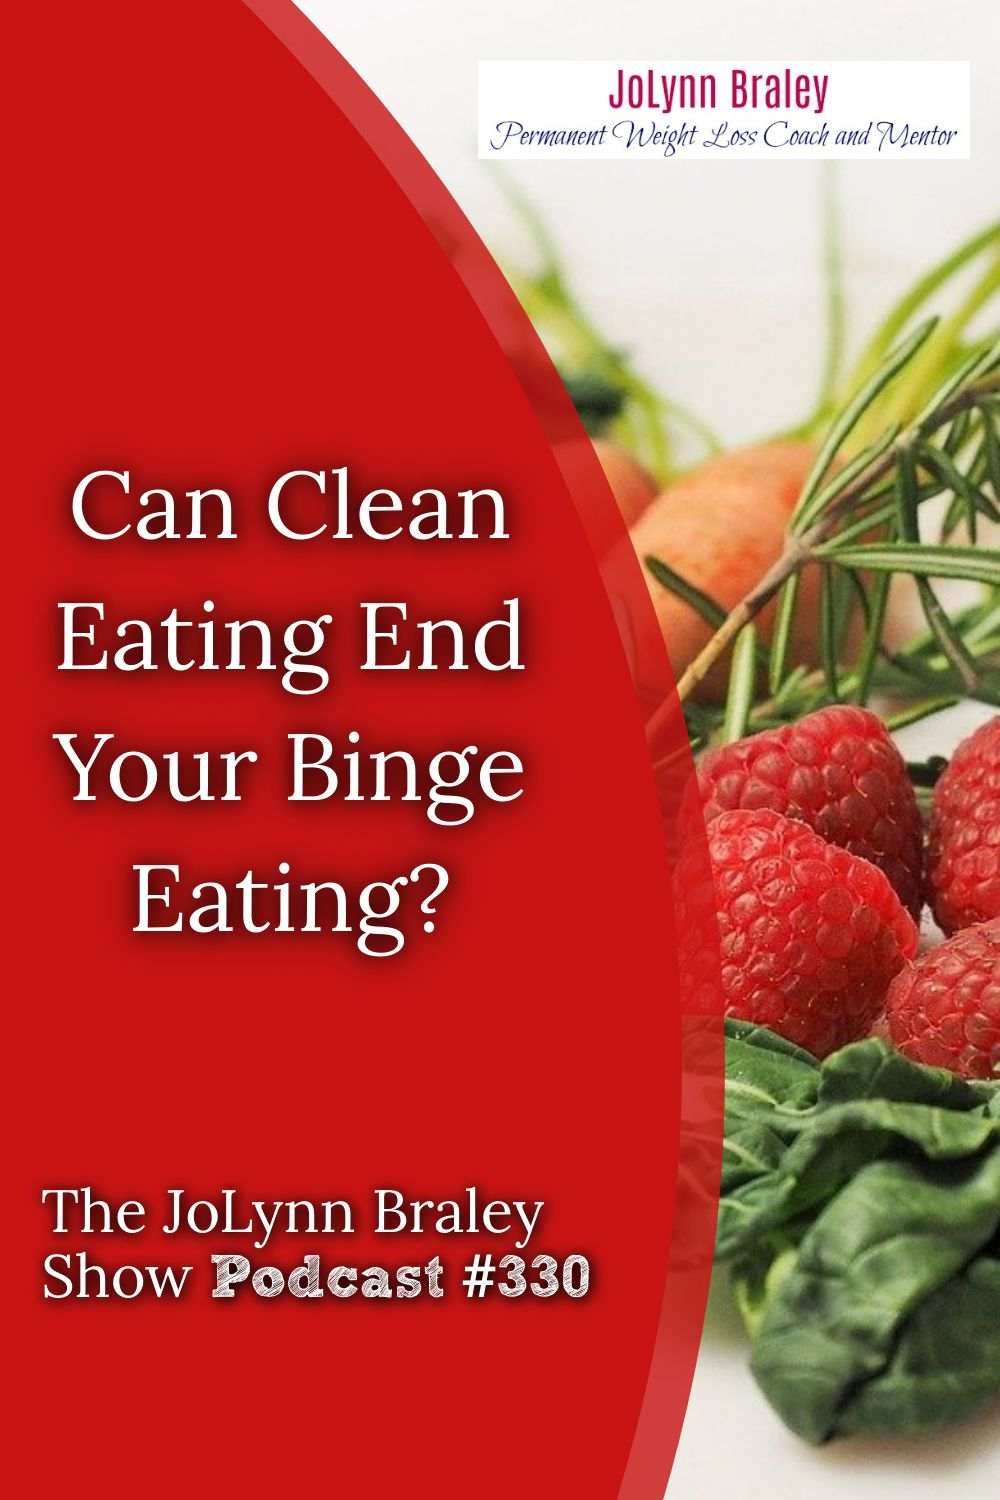 Can Eating Clean End Your Binge Eating? [Podcast #330]